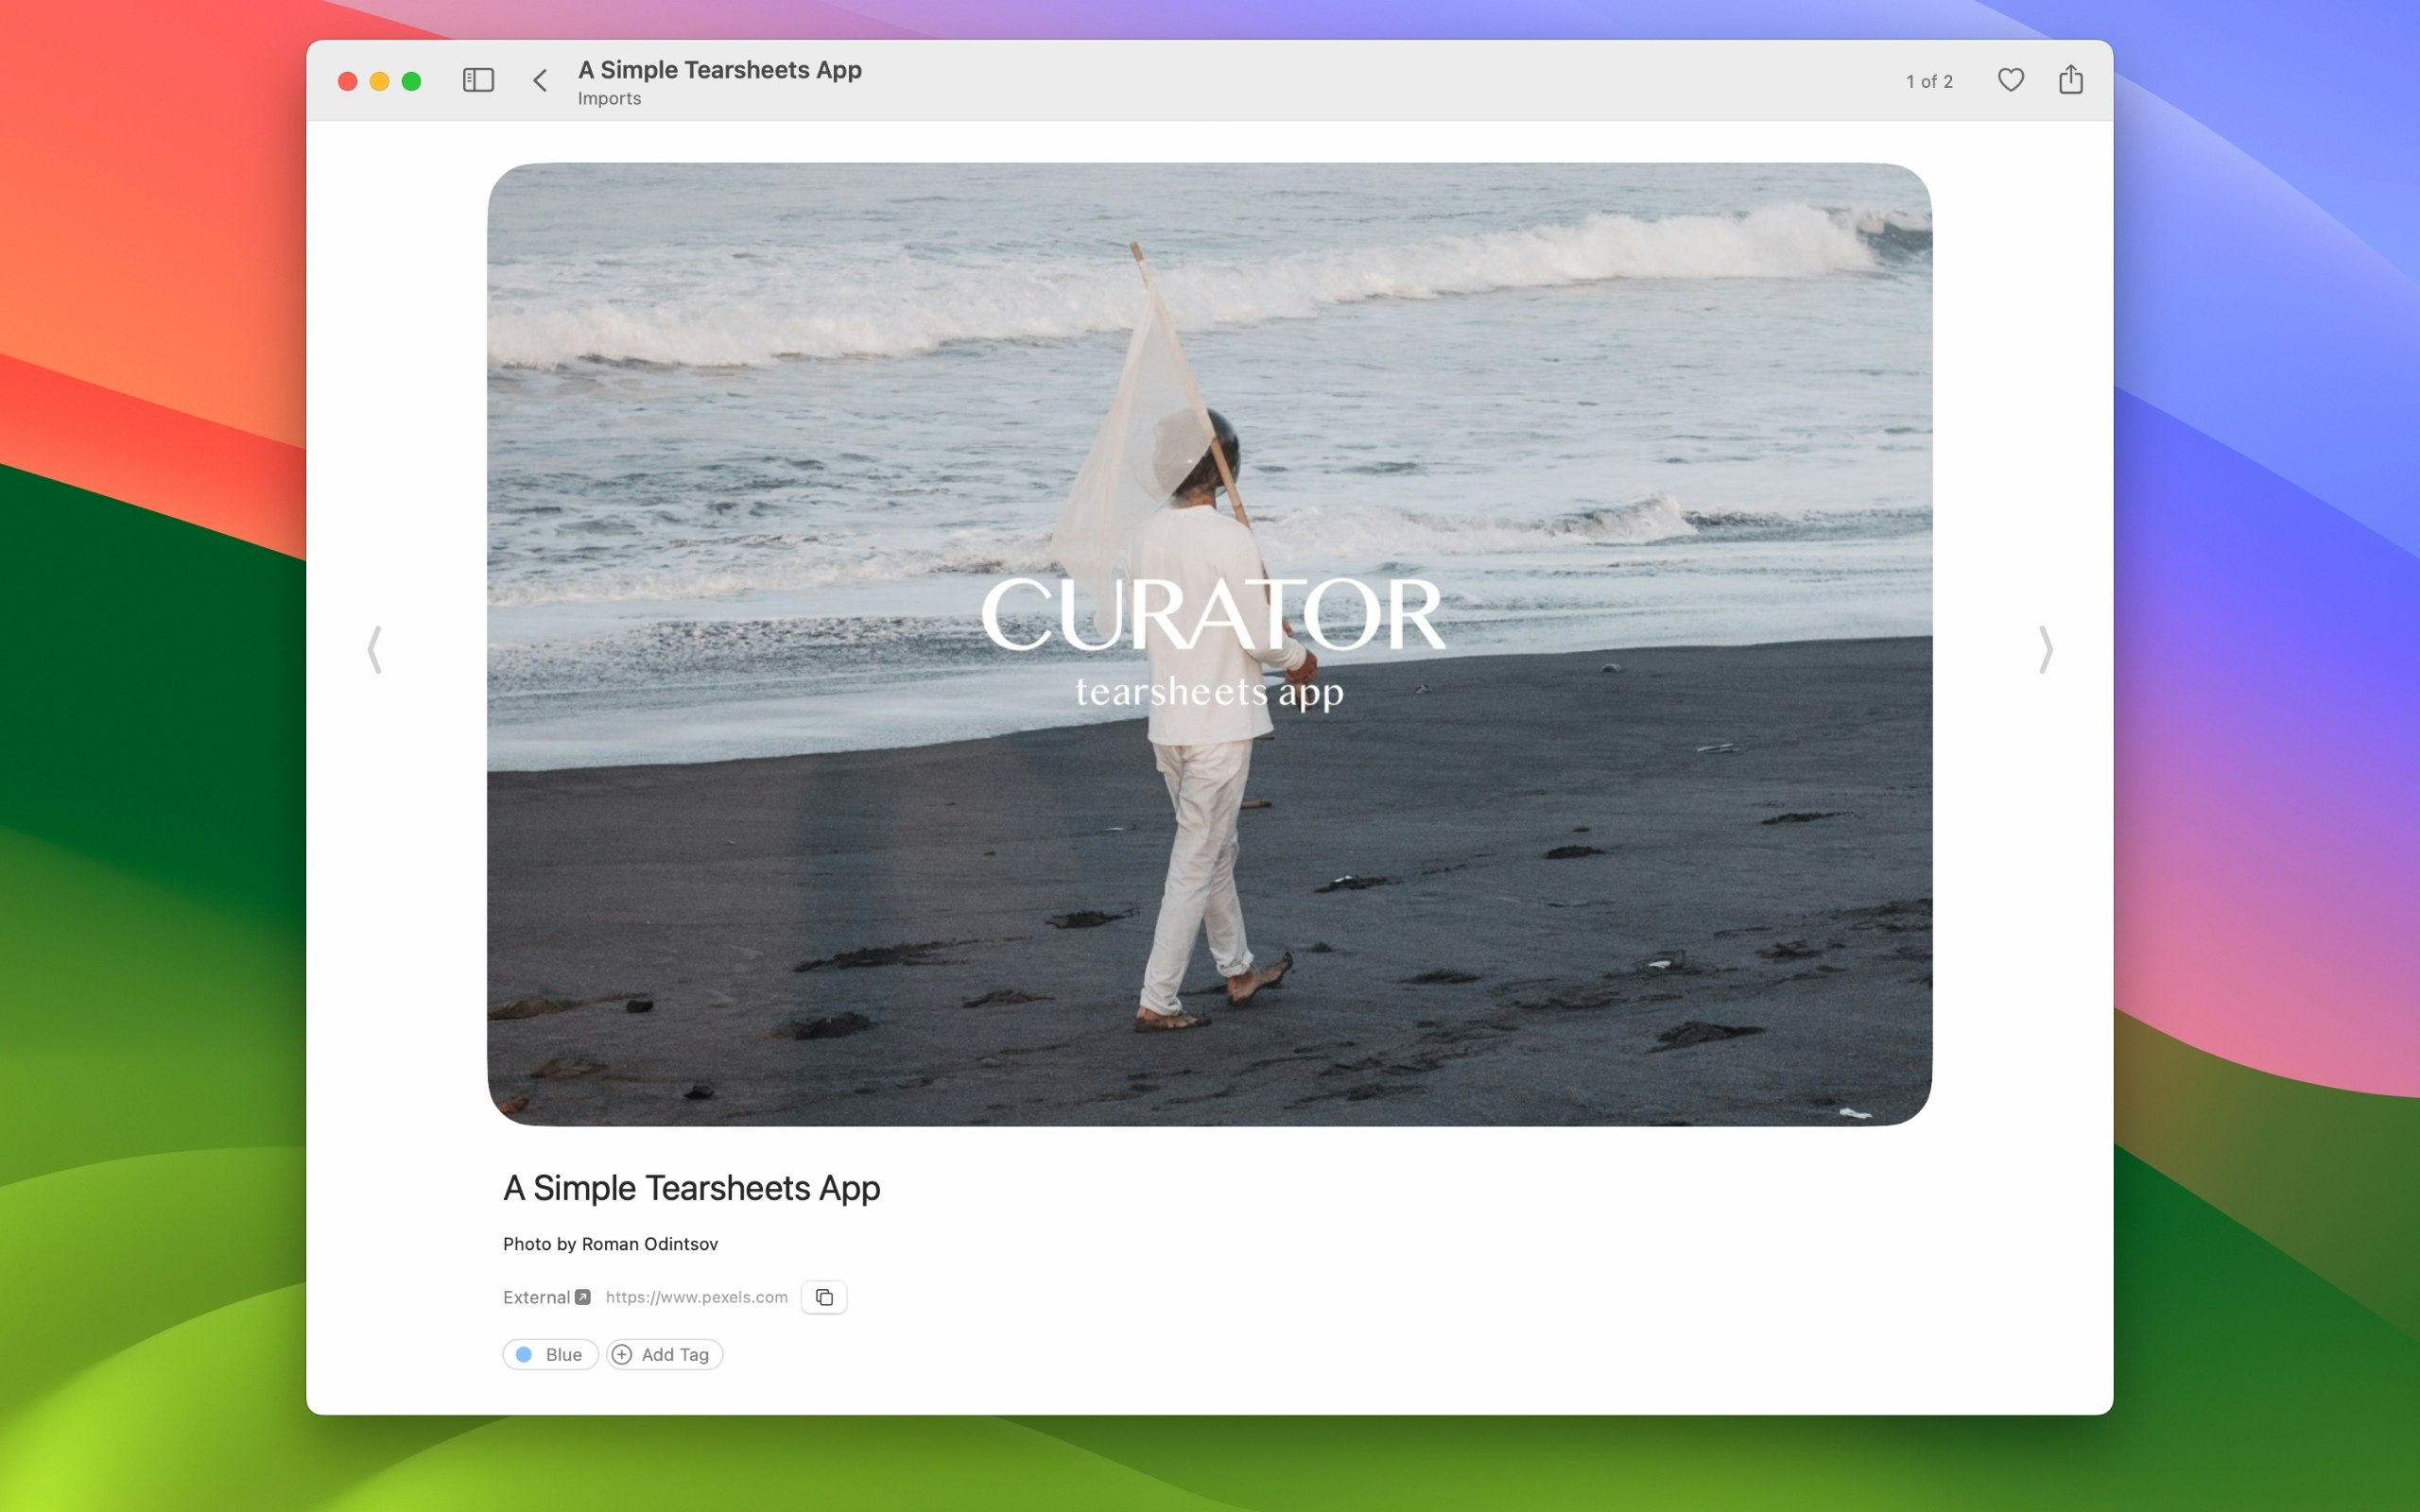 startuptile Curator Tearsheets App-Curate visual content offline.